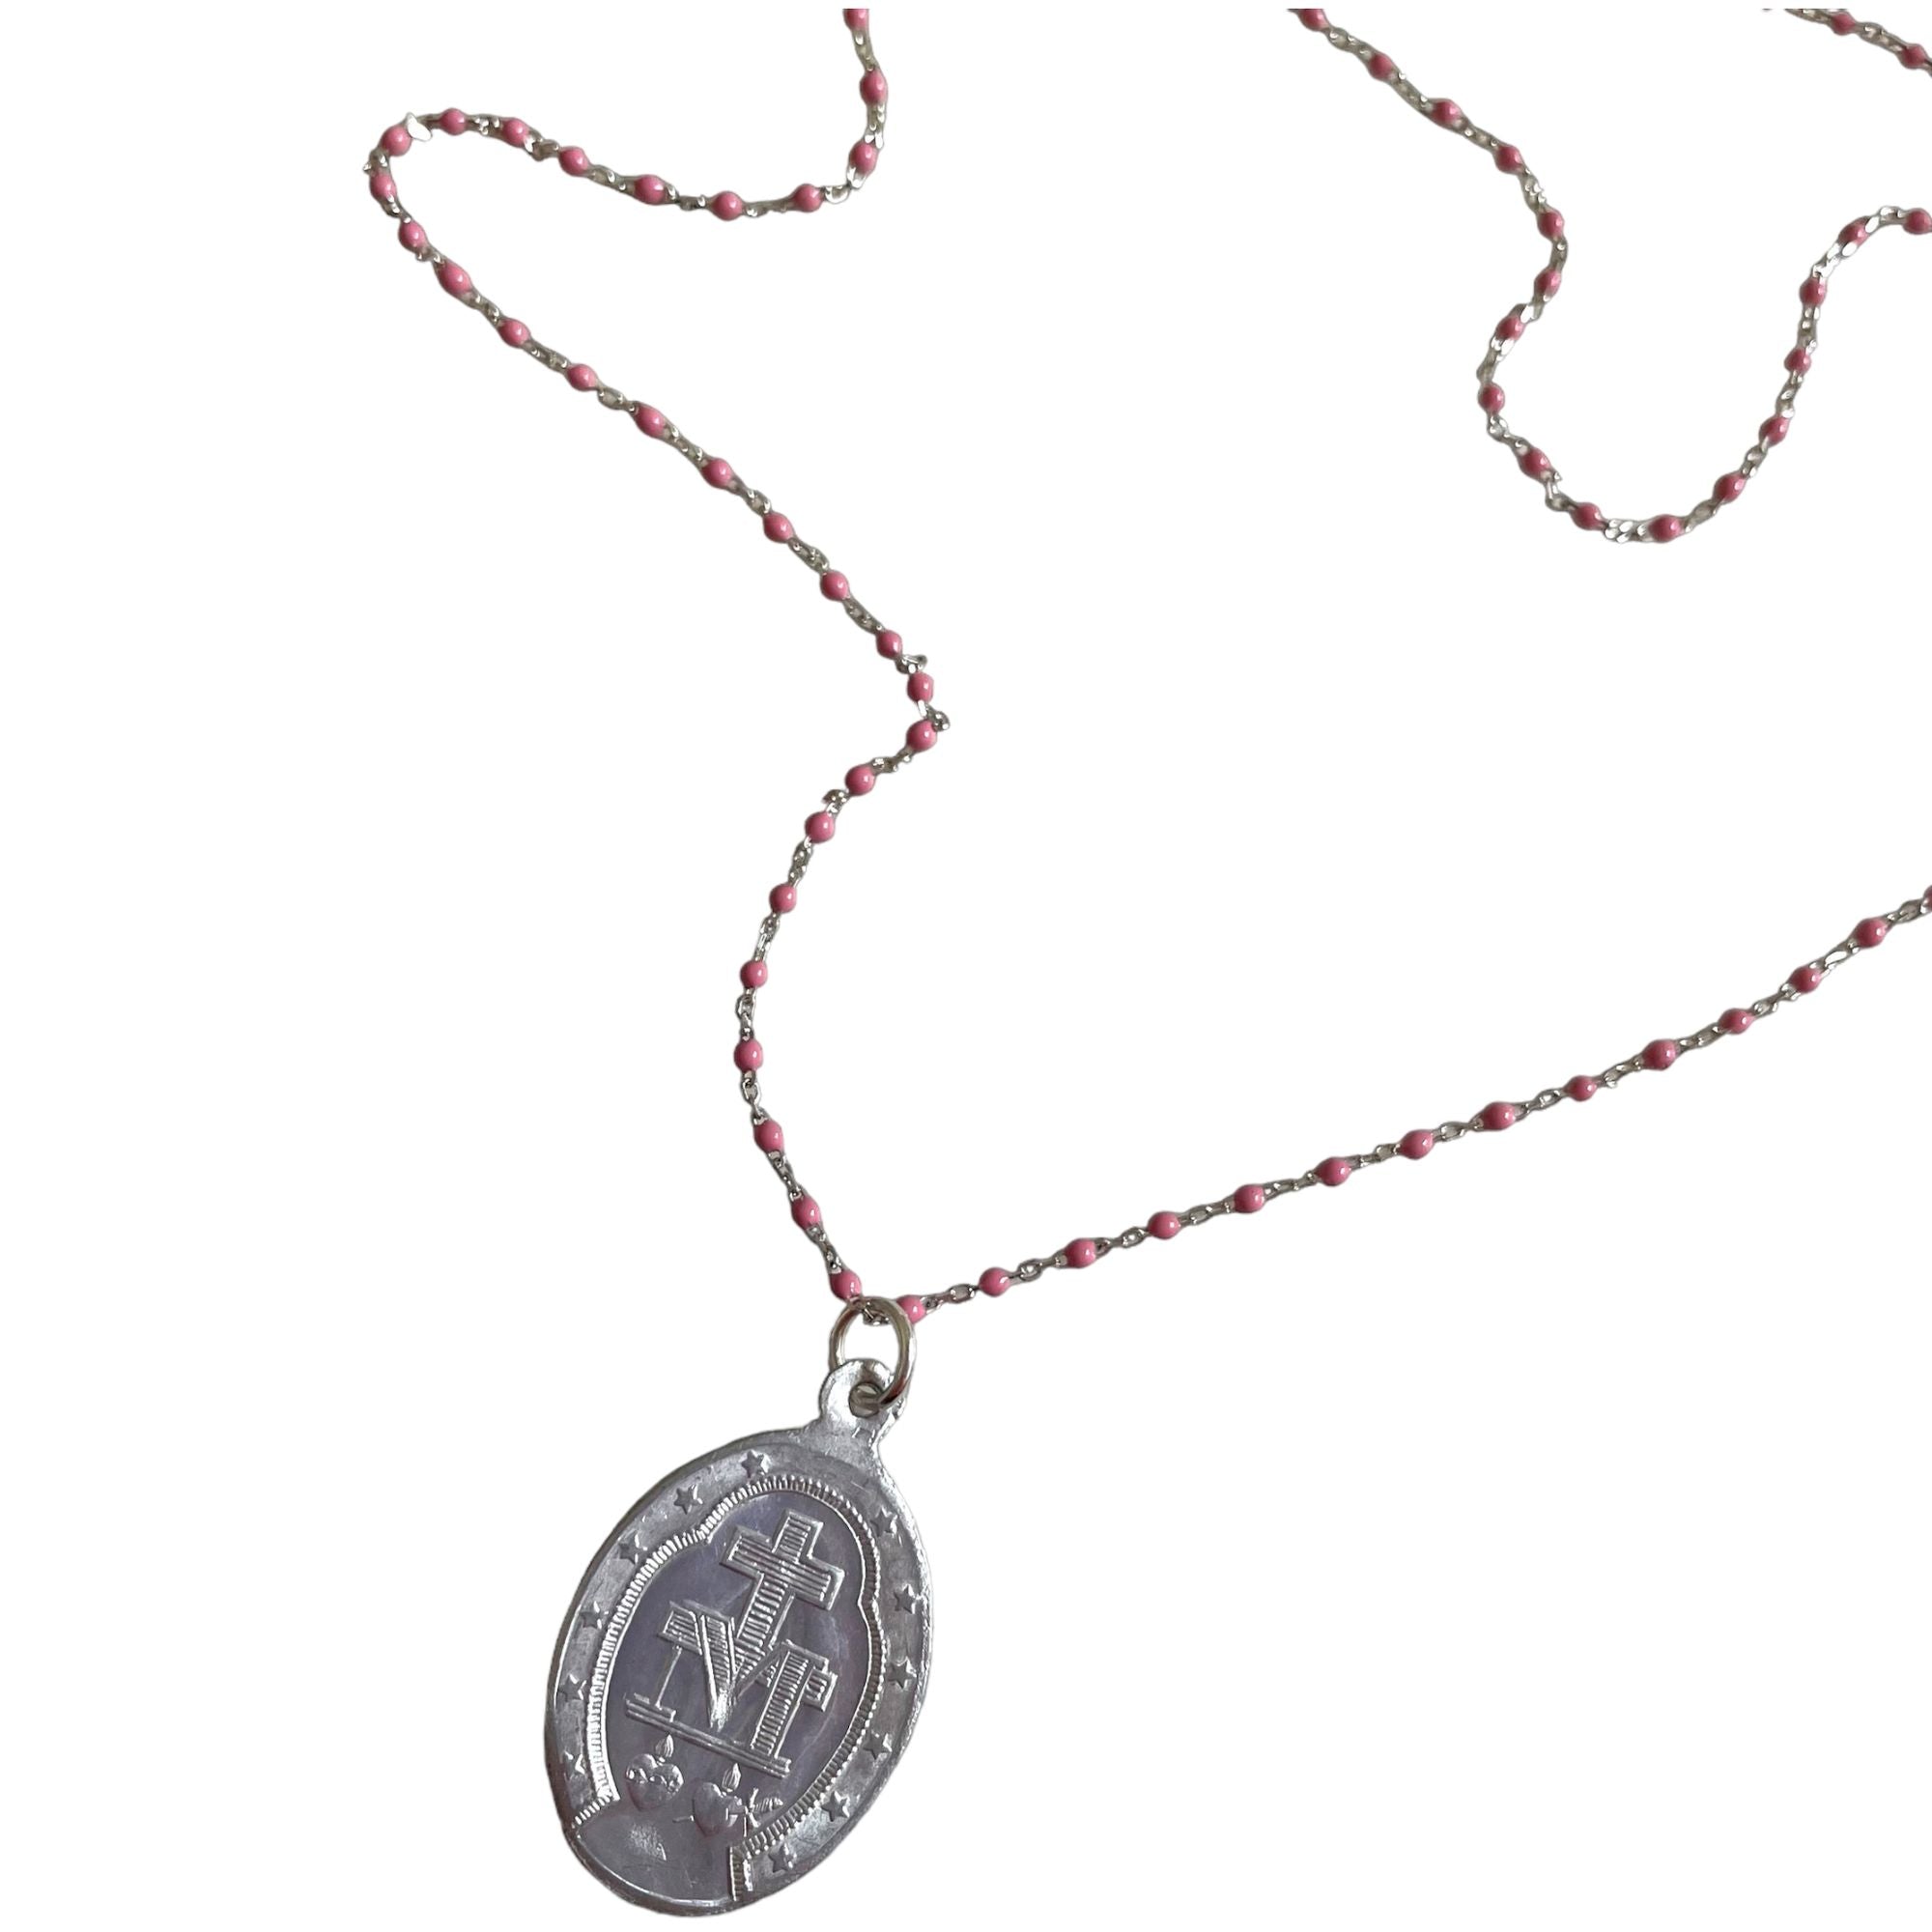 HOLY MARY ON ROSITA NECKLACE SILVER 925 Club Palma 